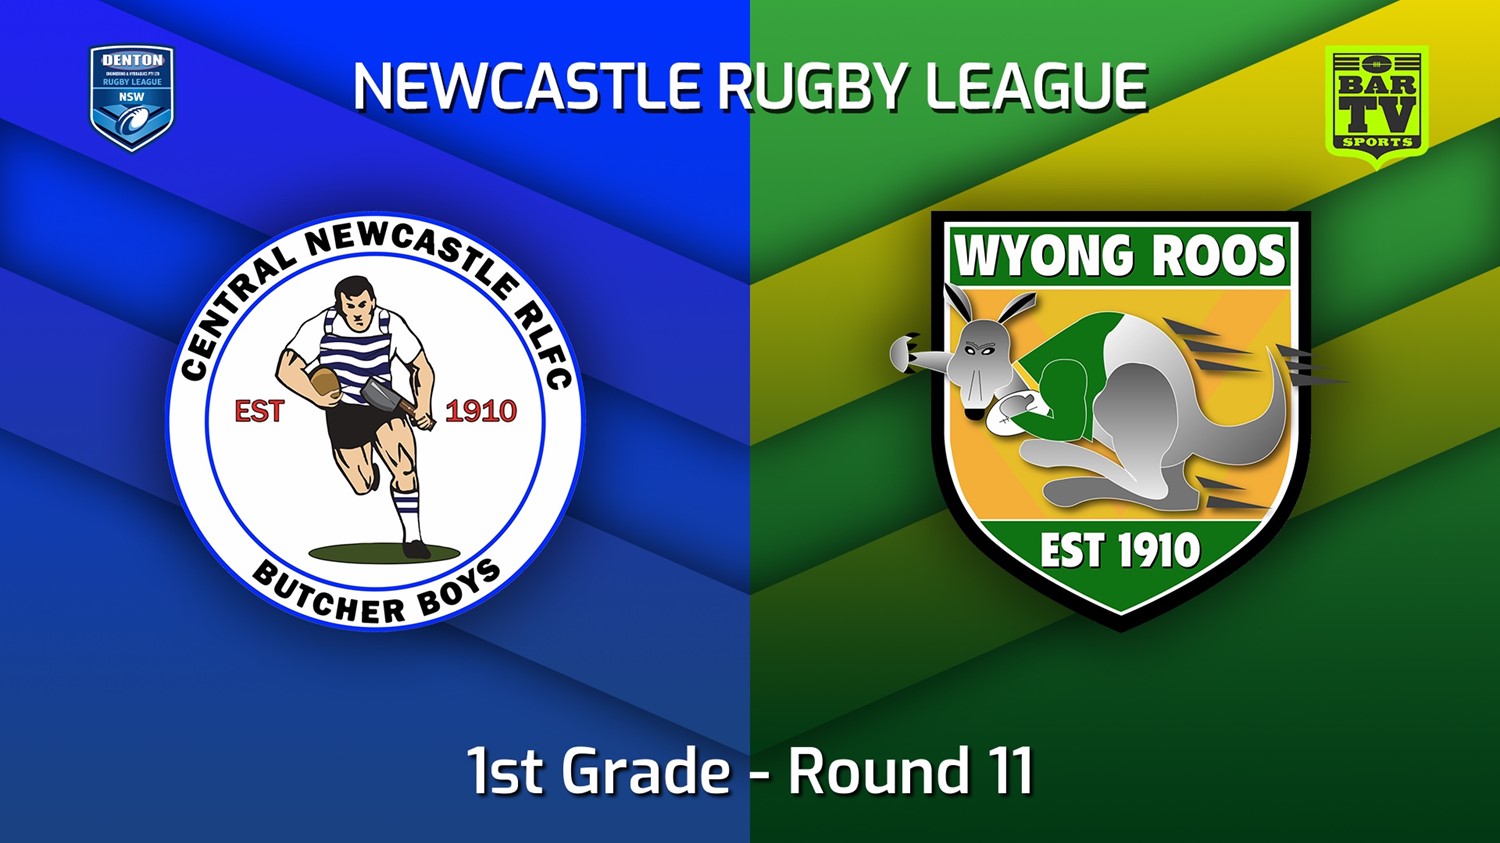 220612-Newcastle Round 11 - 1st Grade - Central Newcastle v Wyong Roos Slate Image